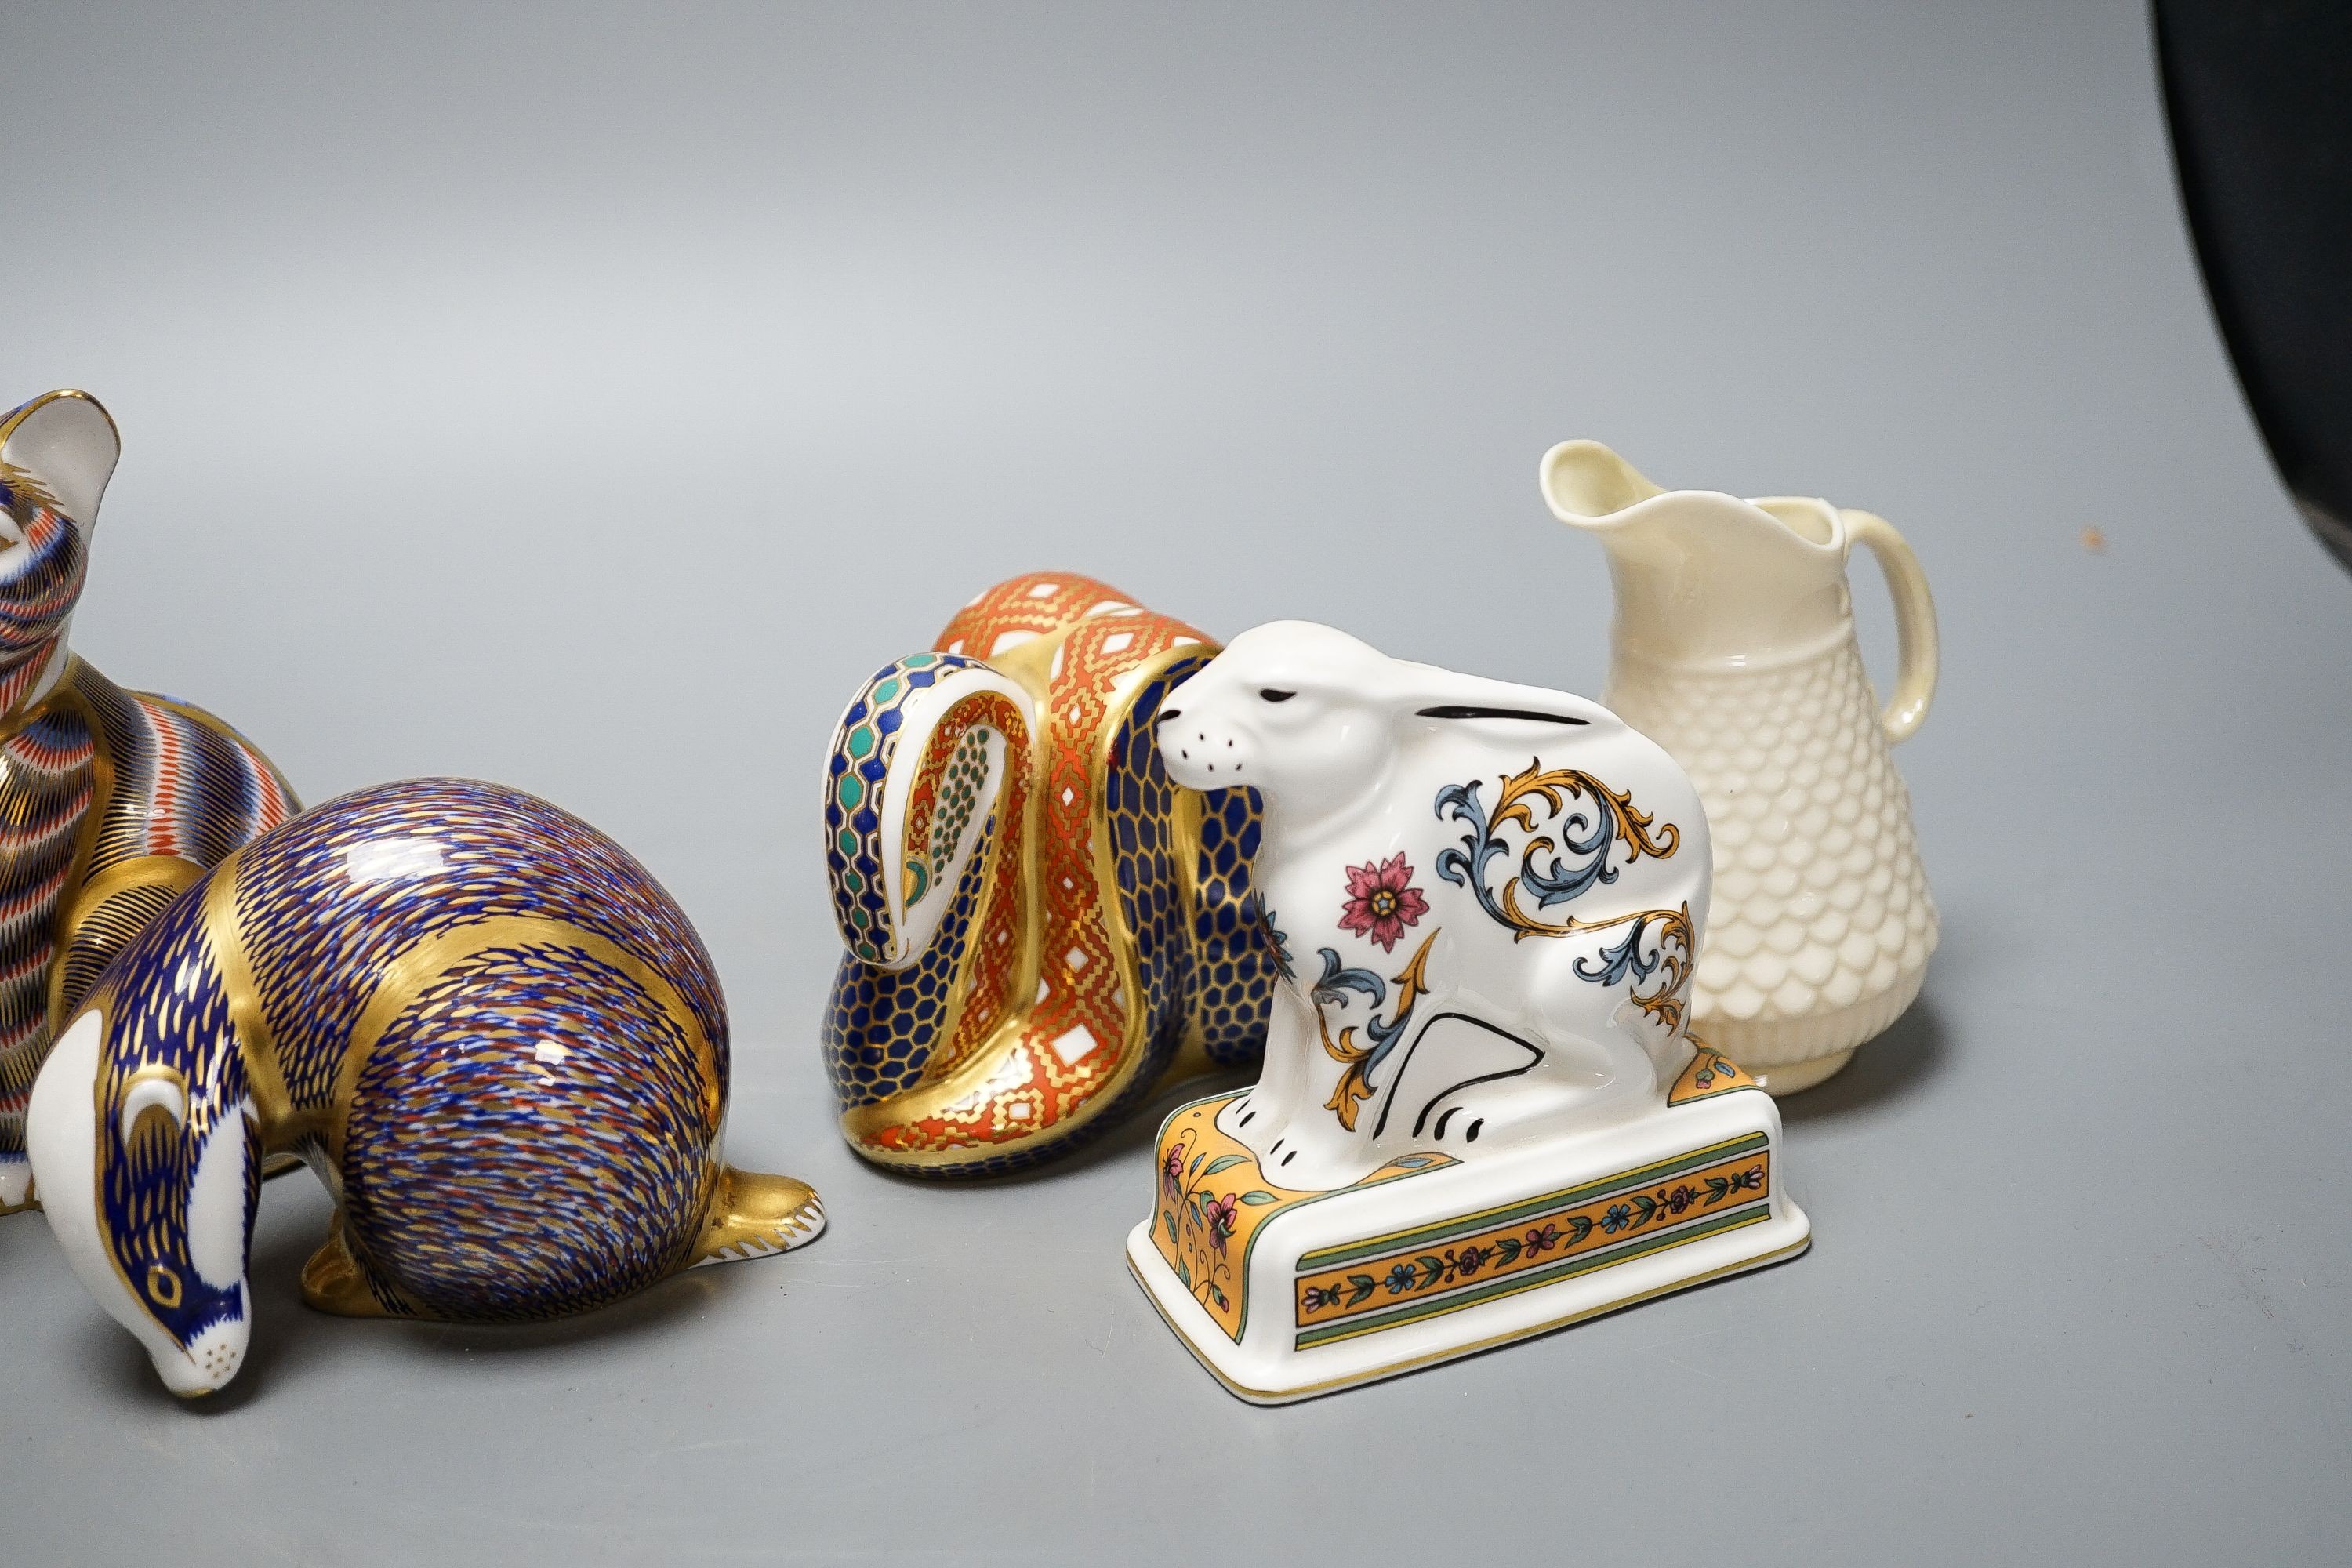 Four Royal Crown Derby paperweights, a Royal Doulton jug, a Belleek jug and a Wedgwood Noah’s ark collection hare